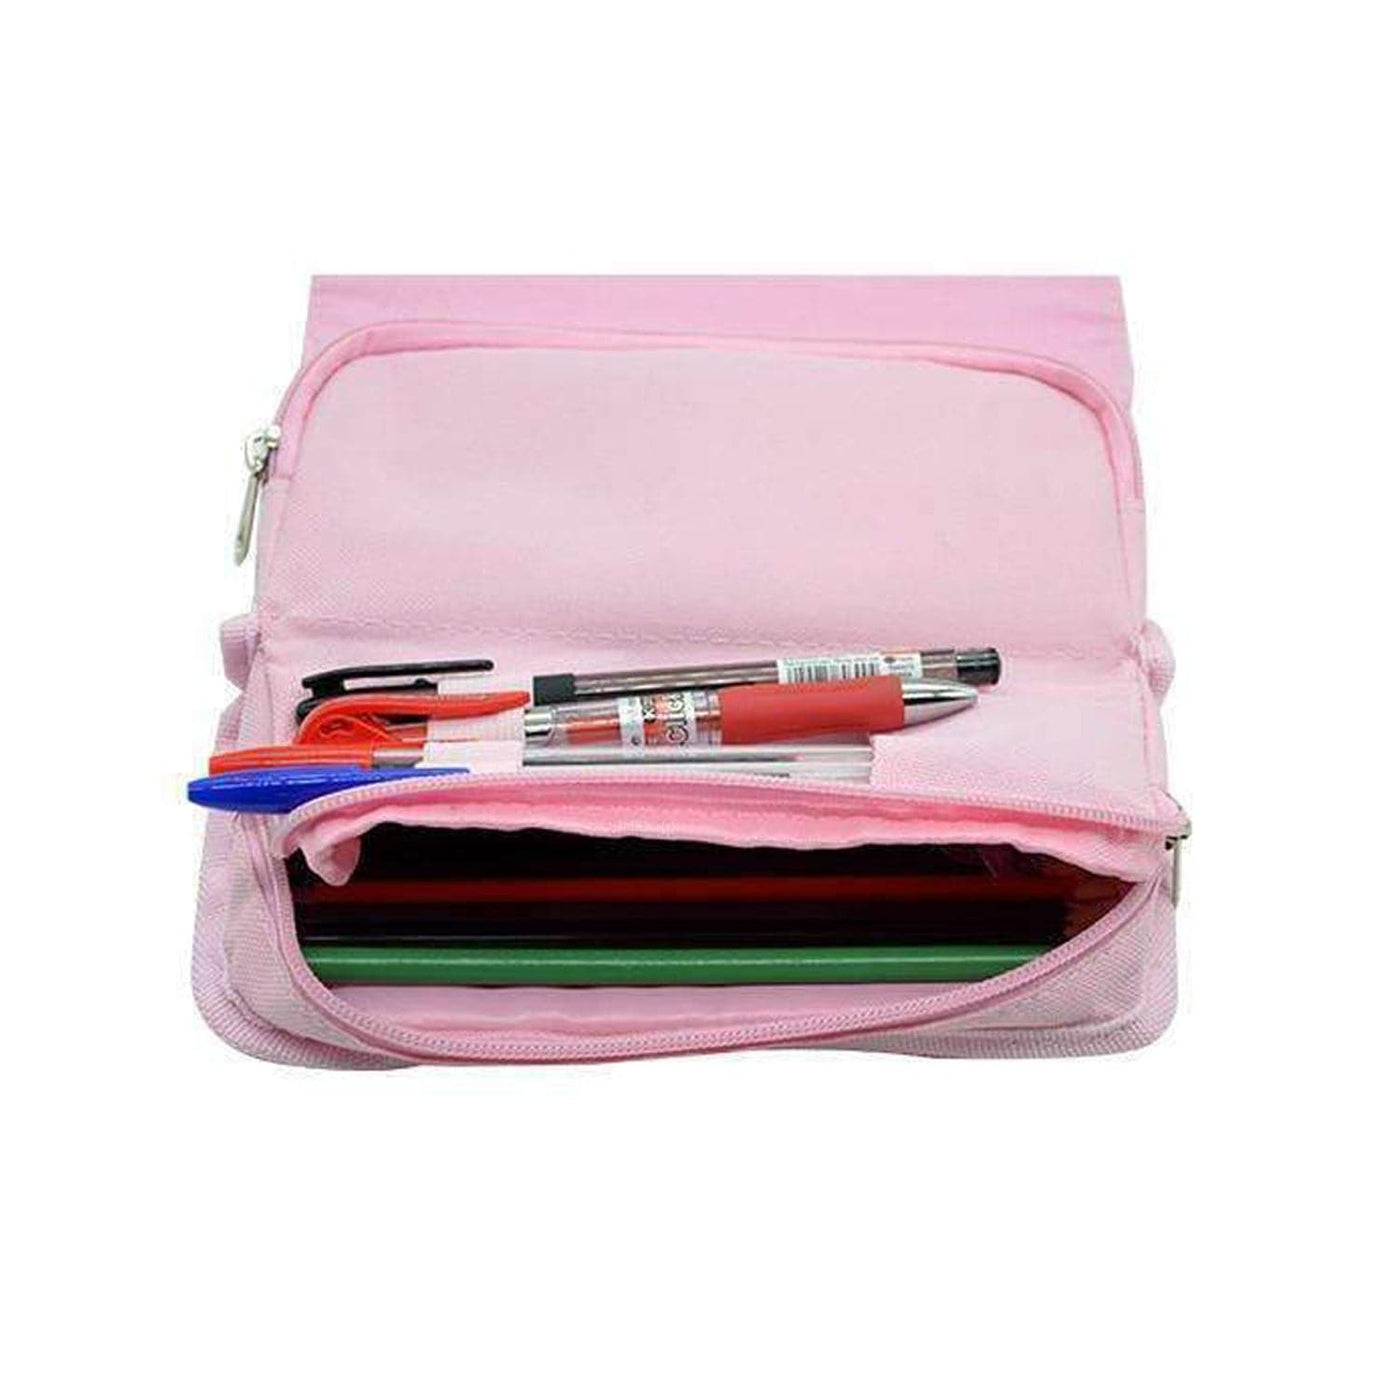 Fast Food Meal - Fast Food Patterns Pencil Case